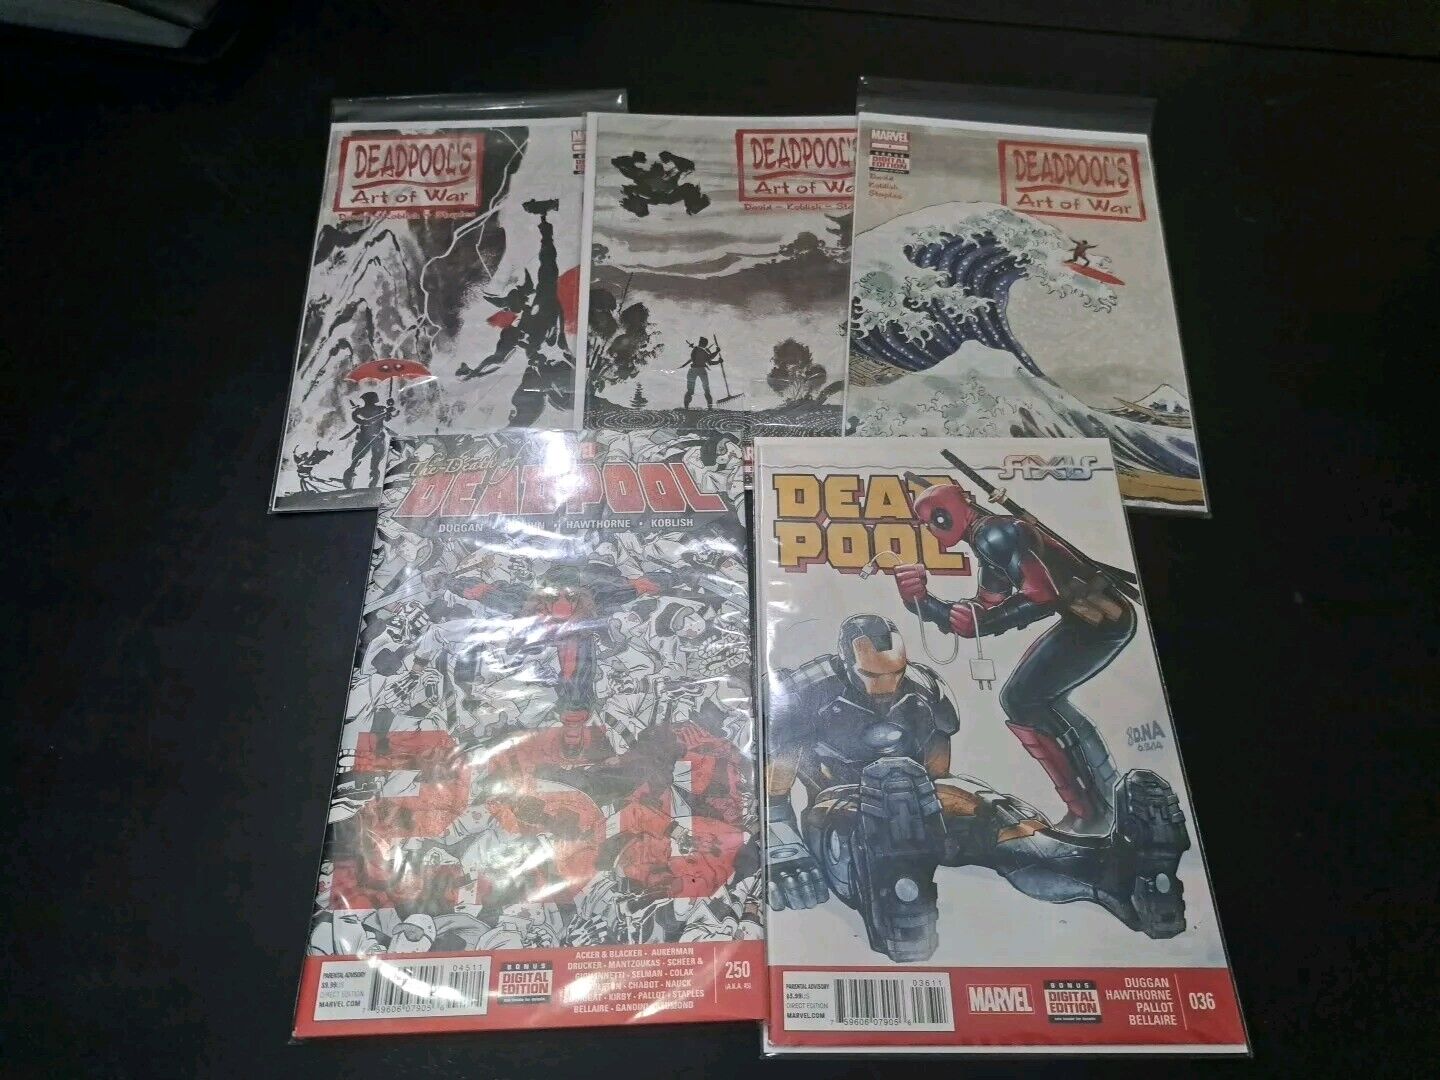 Deadpool's Art of War (2014) #2-4 With Death Of Deadpool 250 And Extra